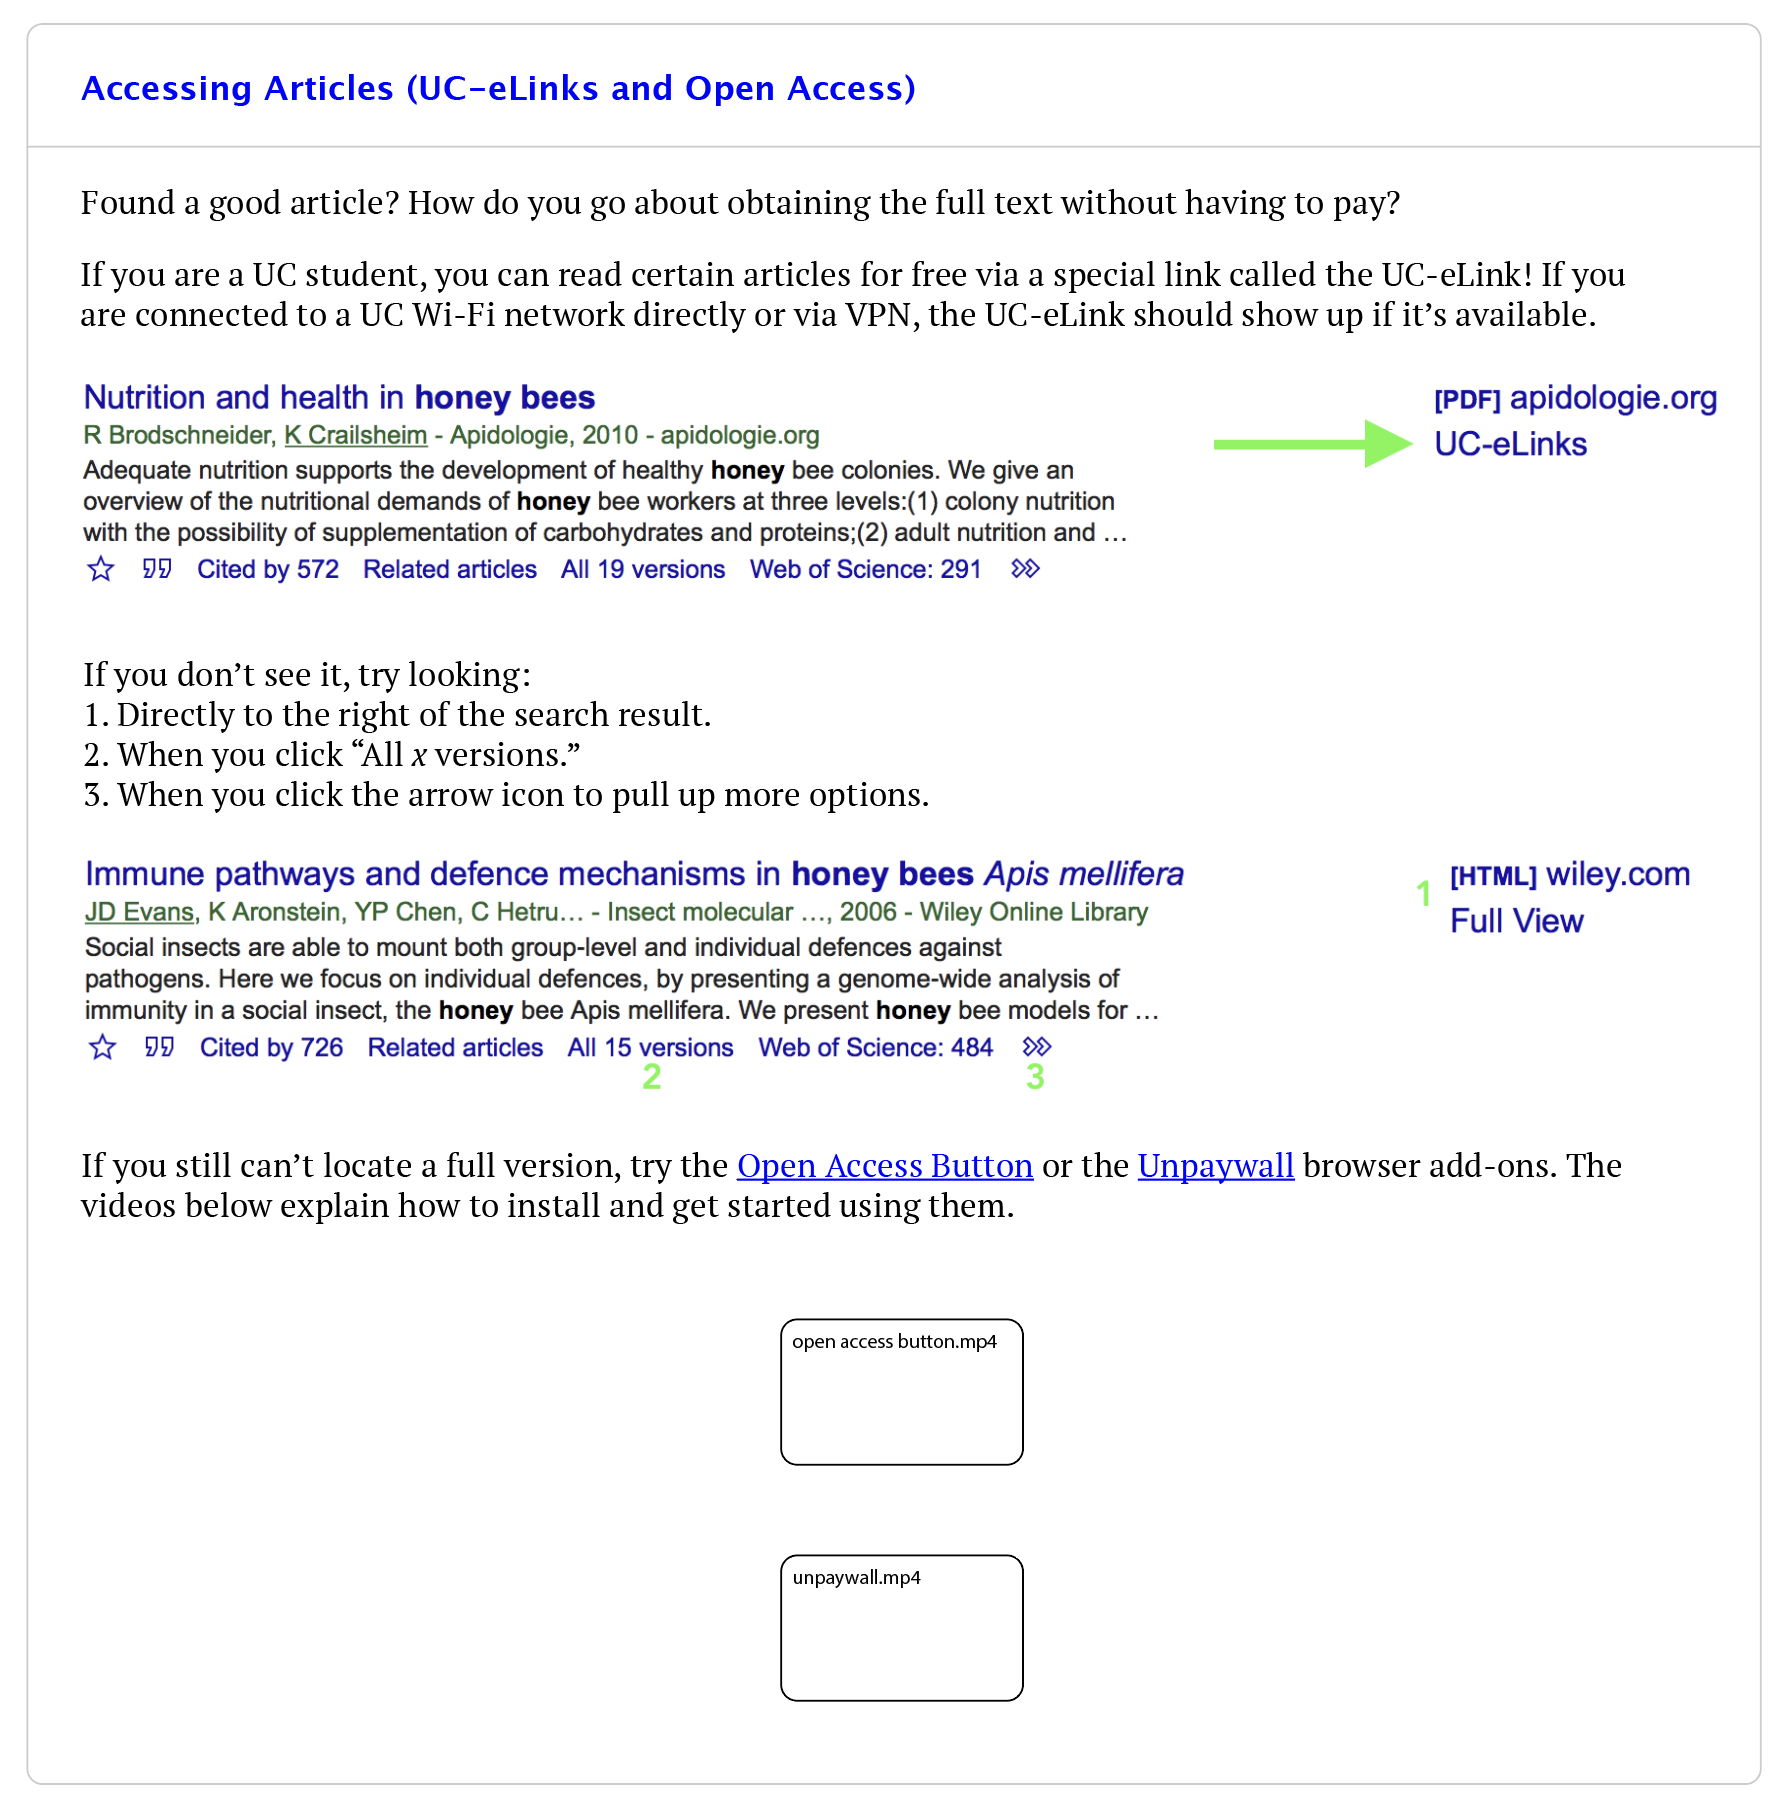 A publishable prototype for the Accessing Articles resource.